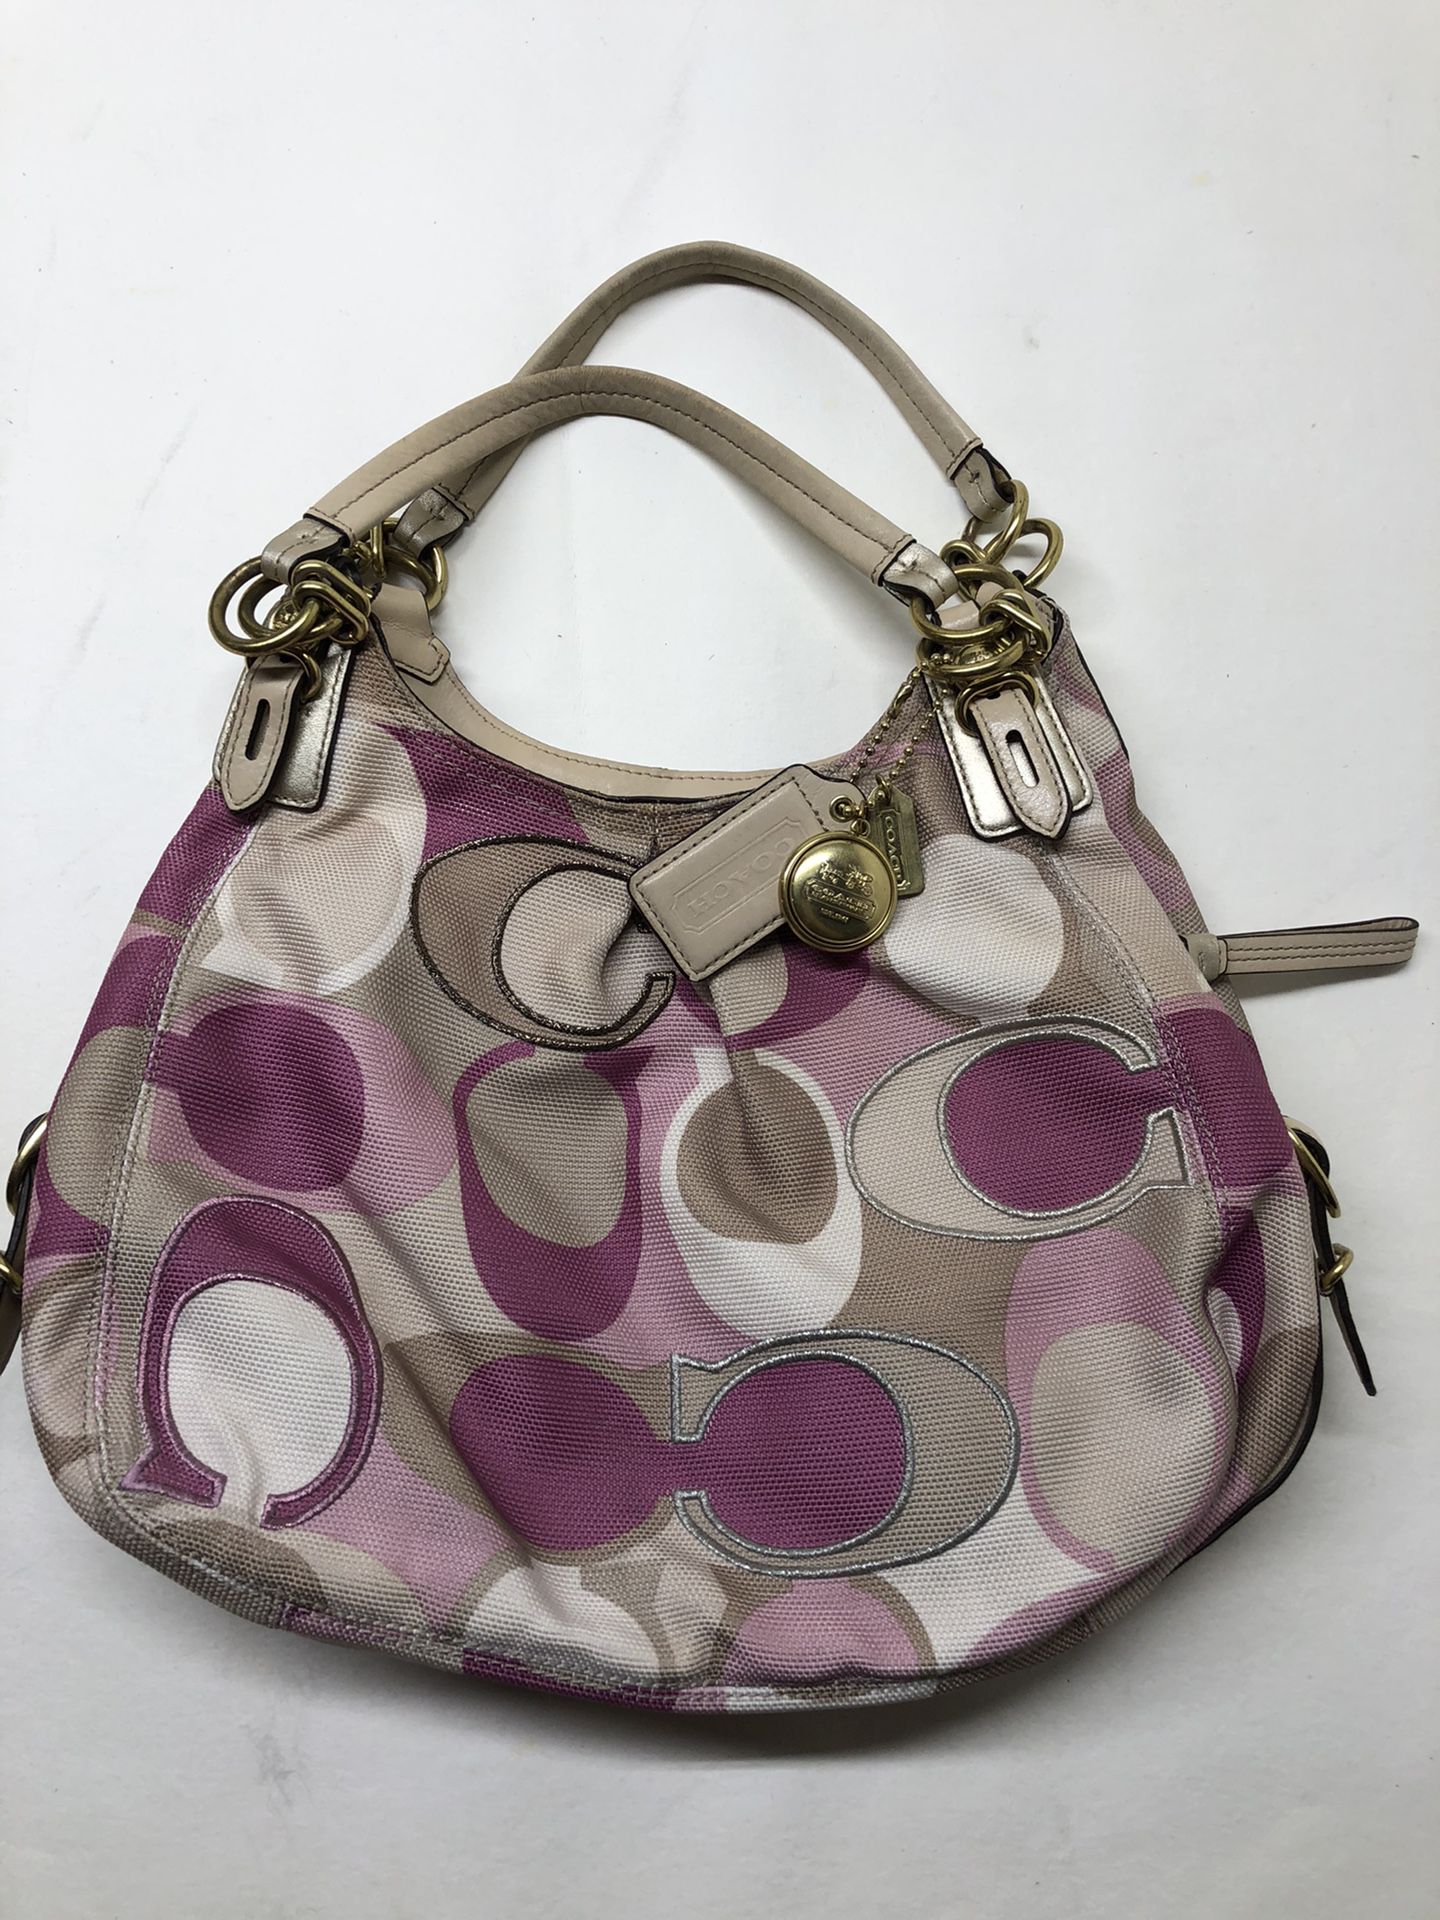 Coach Beige Gold & Lavender Hobo Bag Nice Authentic